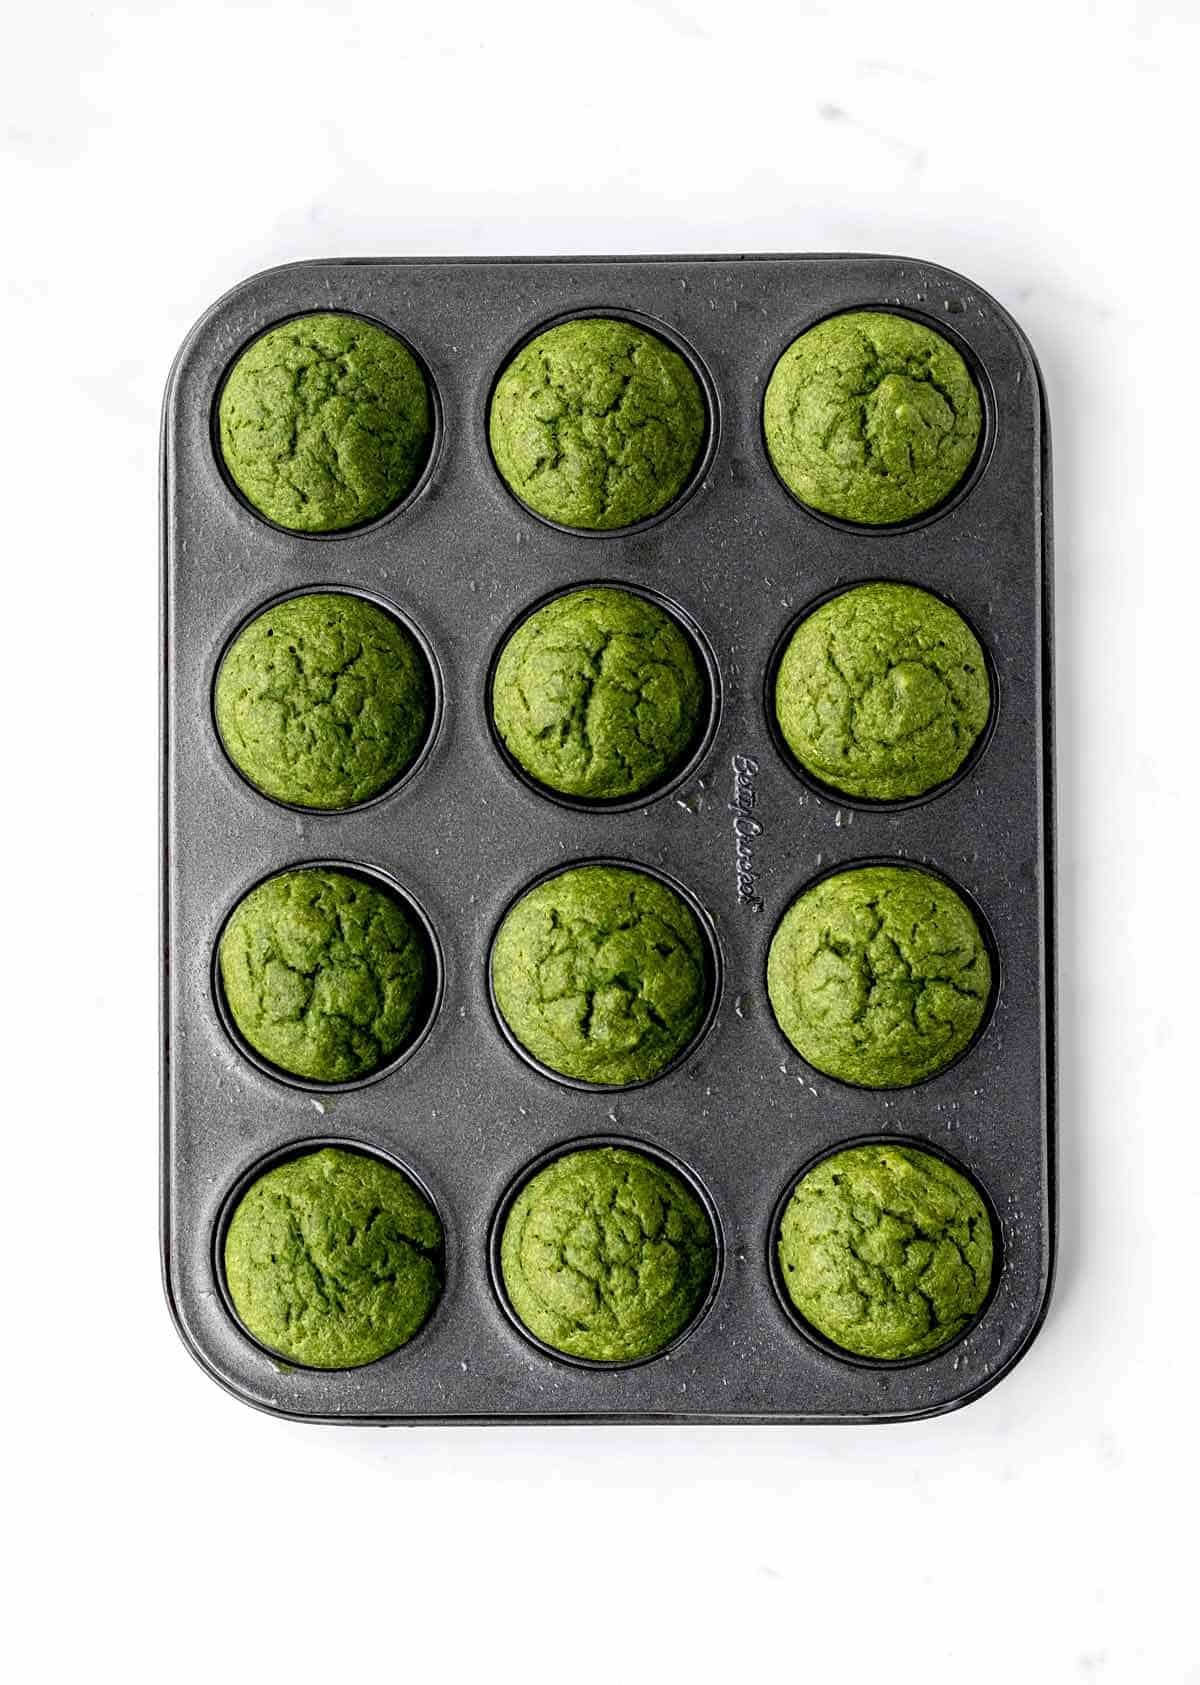 The baked green monster muffins in a mini muffin tin.